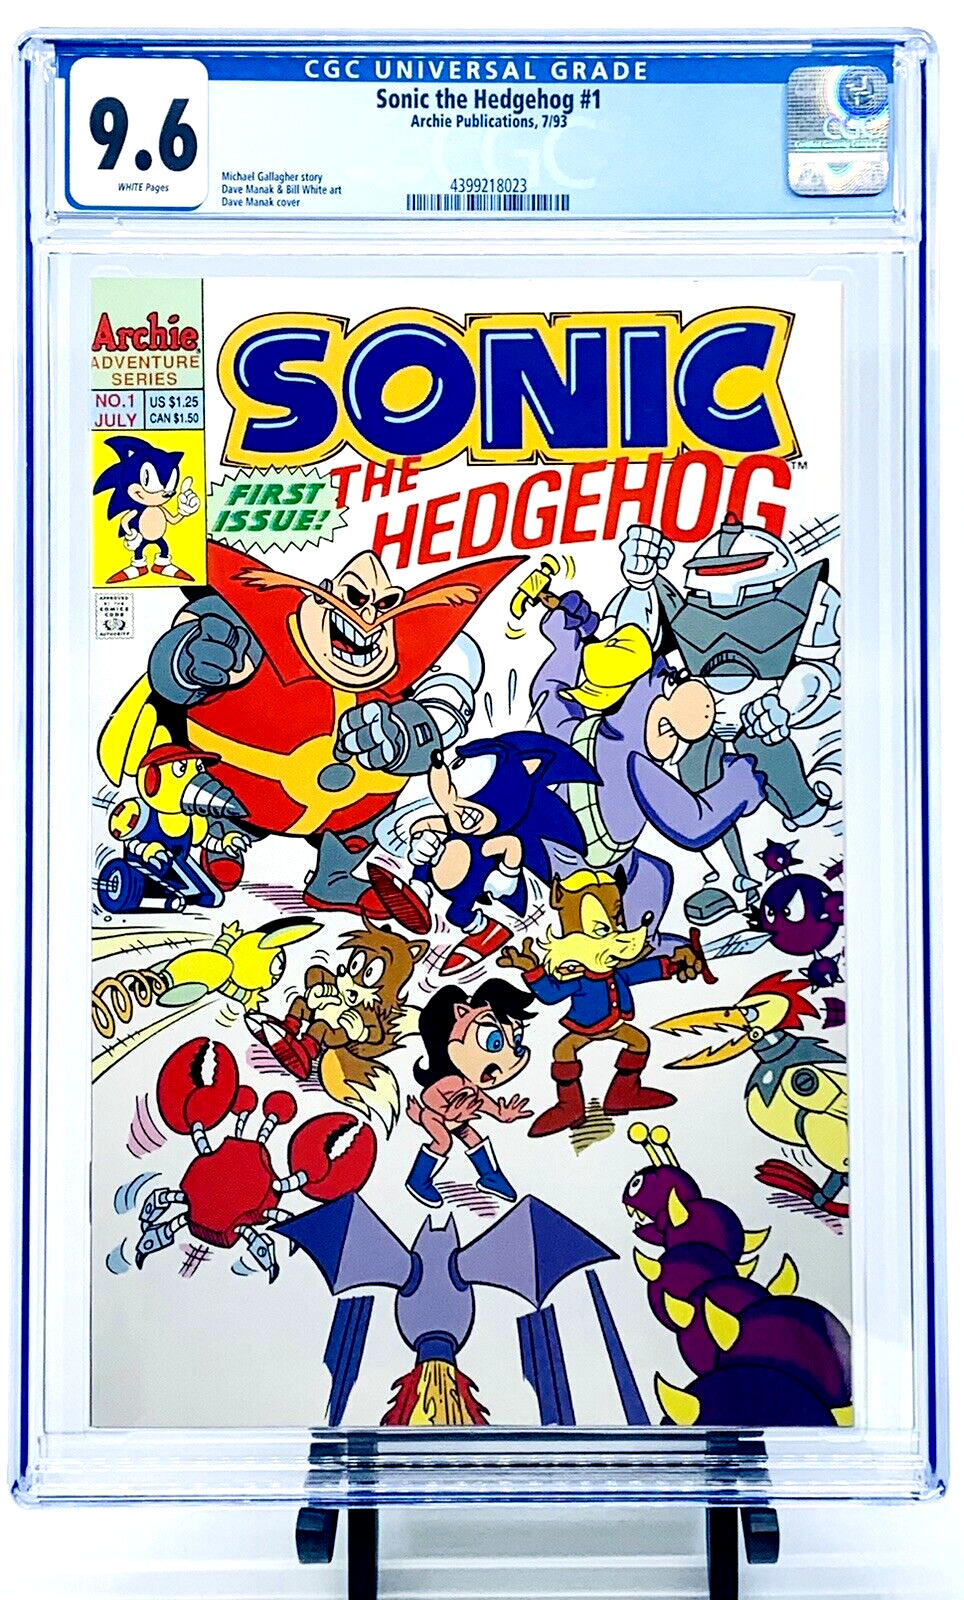 Sonic the Hedgehog #1 CGC 9.6 WP 1993 1st Issue Archie JUST GRADED CLEAR CASE